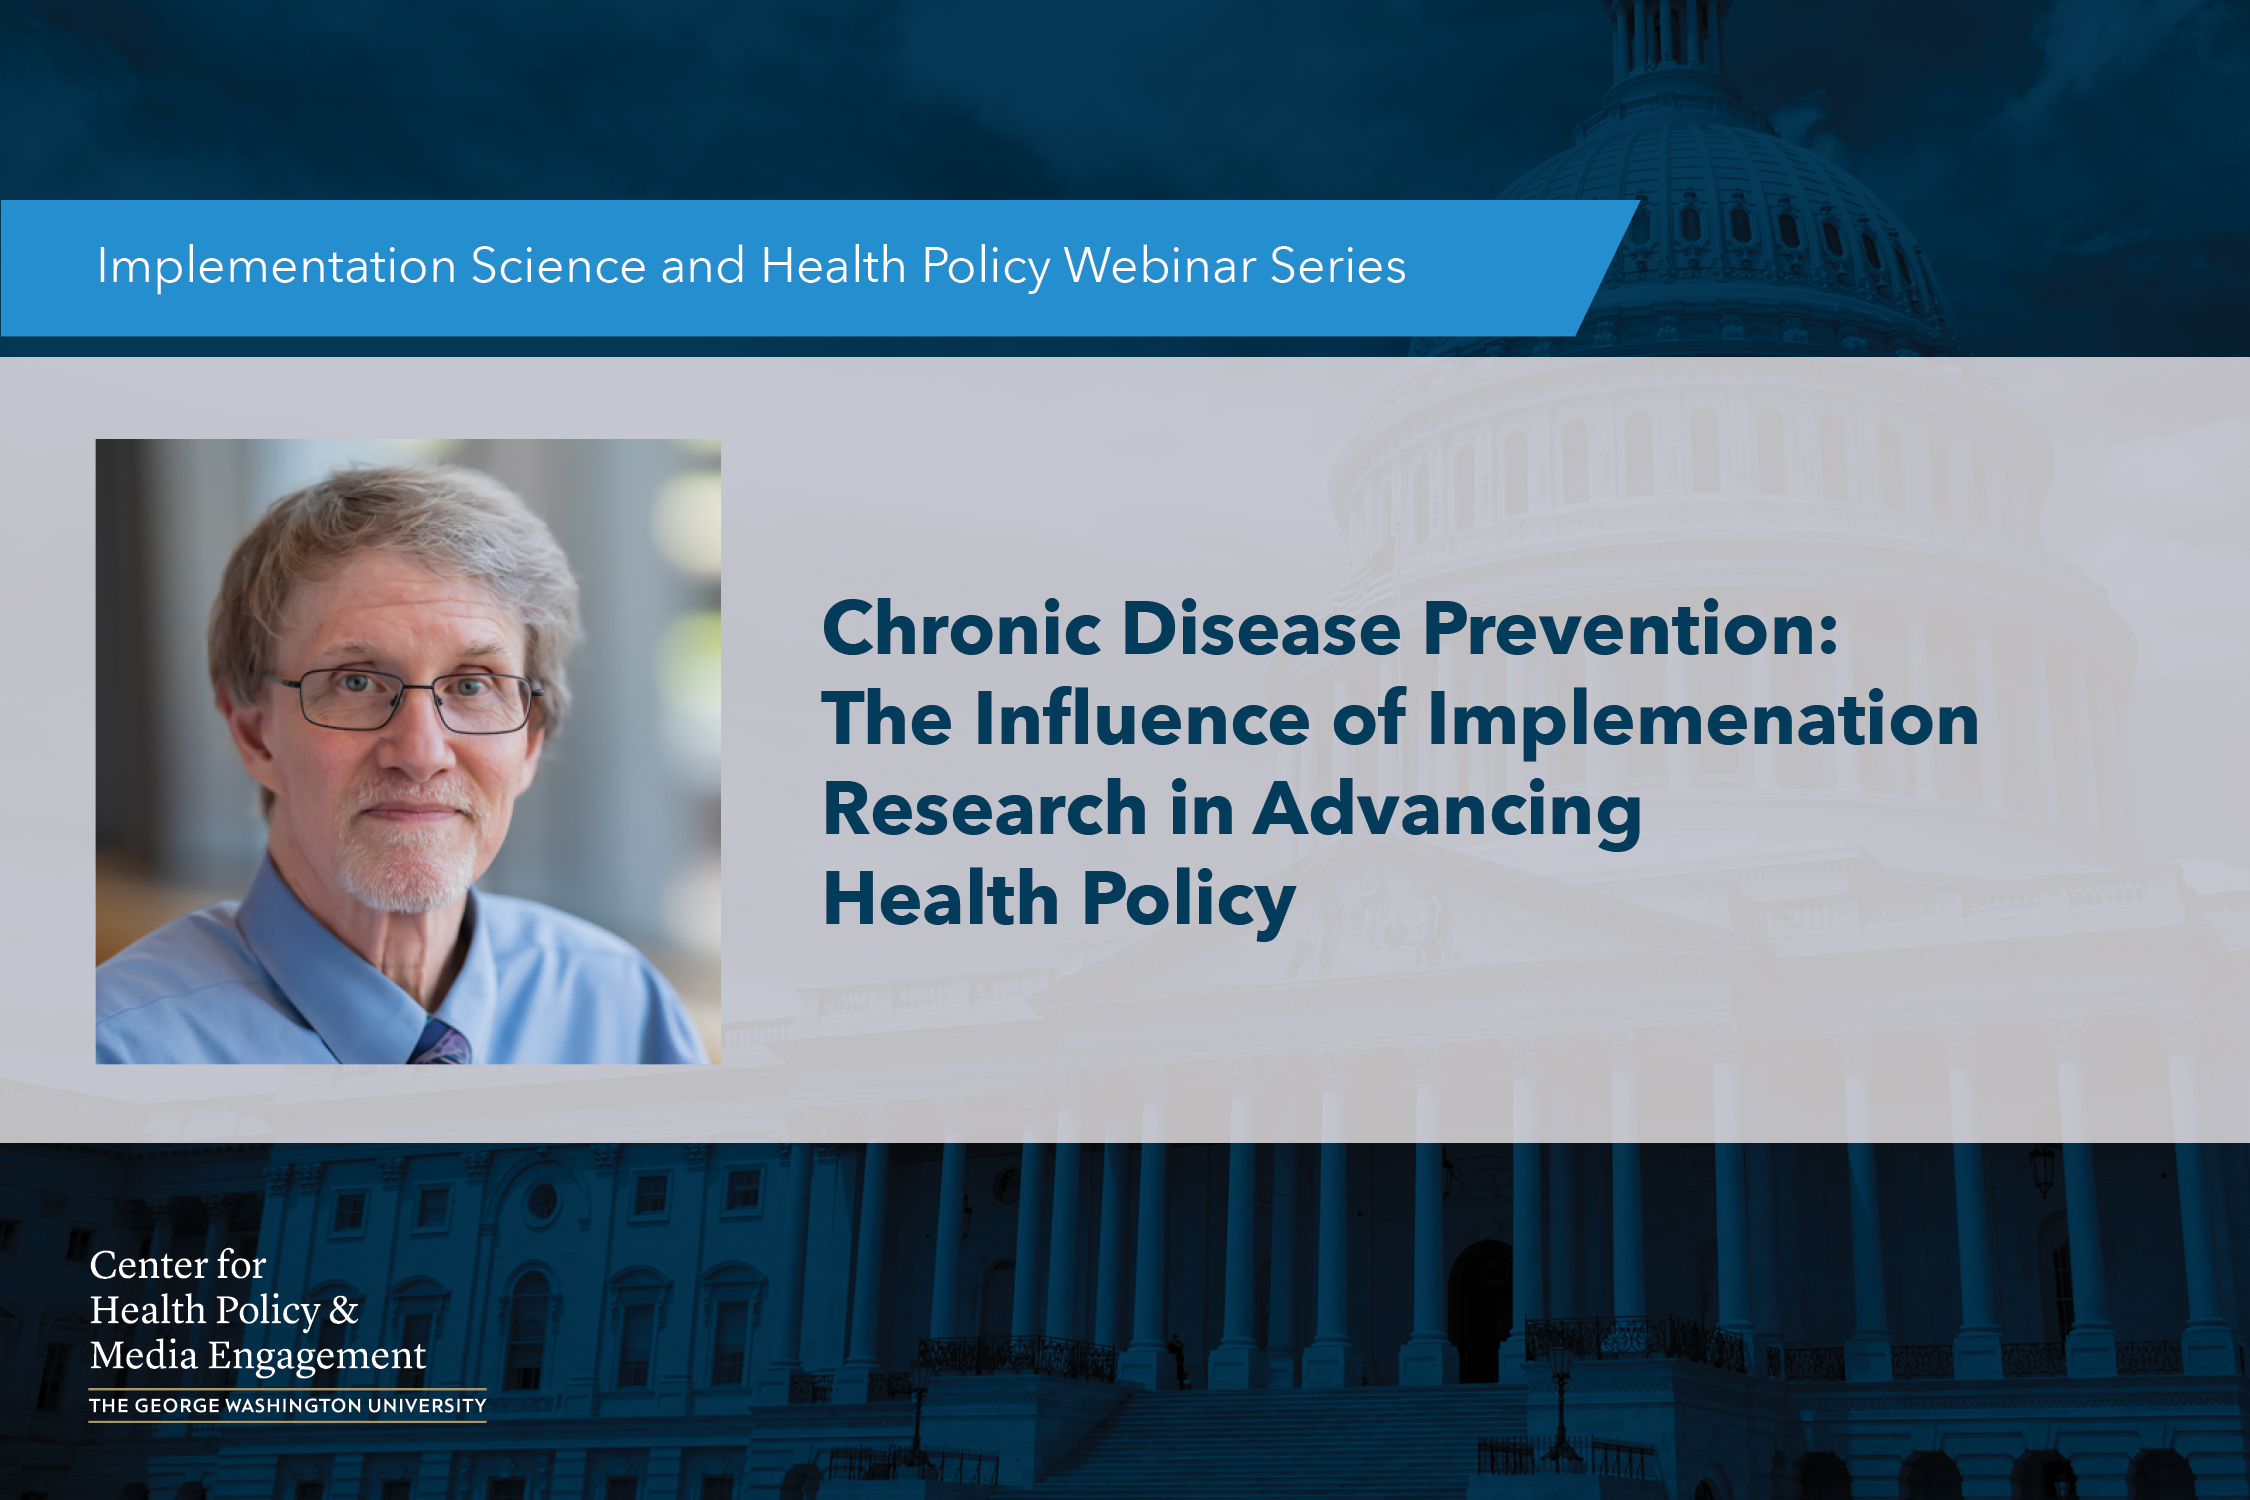 Chronic Disease Prevention: The Influence of Implementation Research in Advancing Health Policy